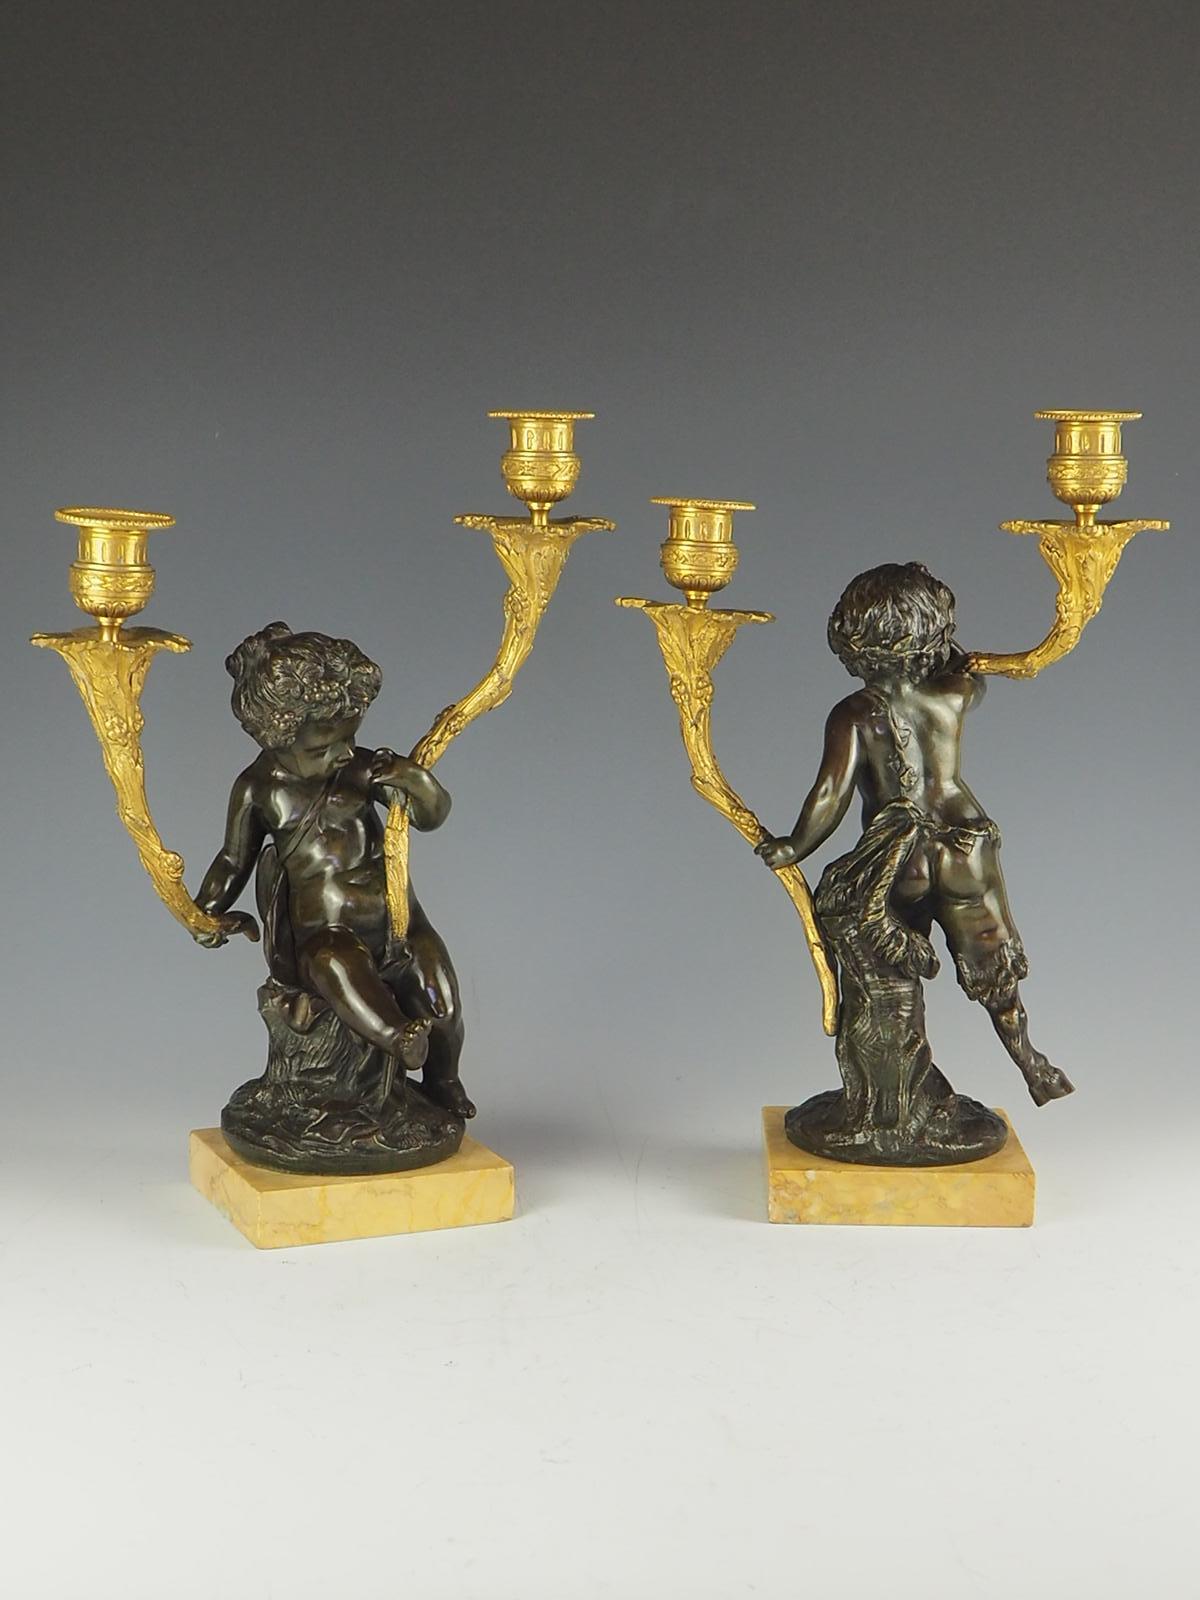 Pair of French Solid Bronze and Ormolu Candelabras, circa 1820 For Sale 1